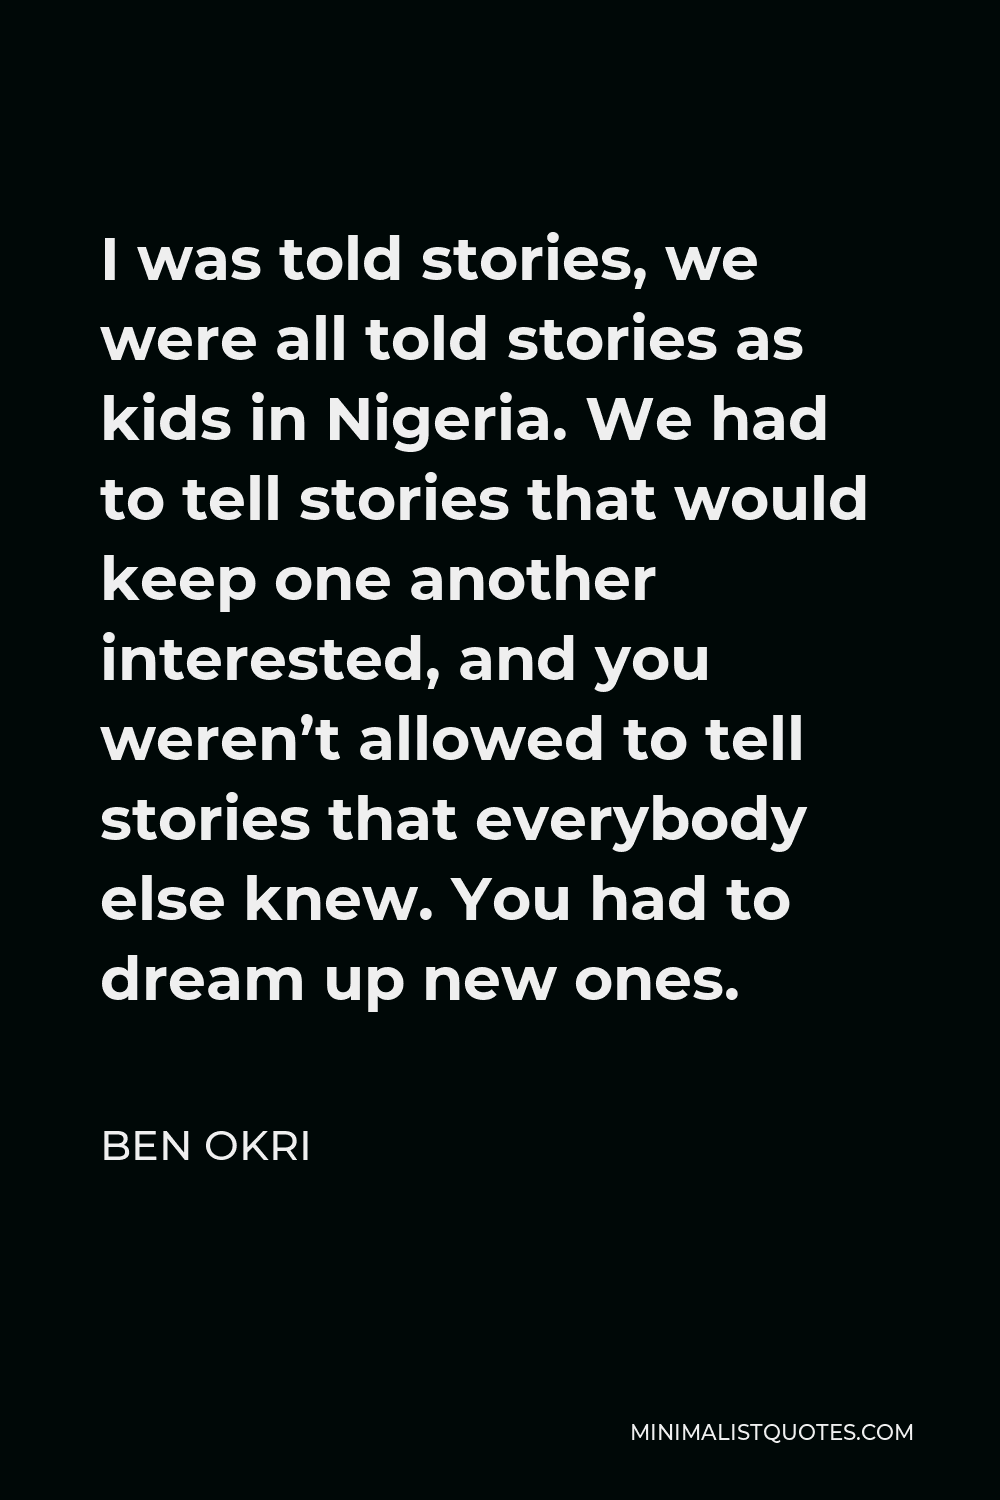 Ben Okri Quote - I was told stories, we were all told stories as kids in Nigeria. We had to tell stories that would keep one another interested, and you weren’t allowed to tell stories that everybody else knew. You had to dream up new ones.